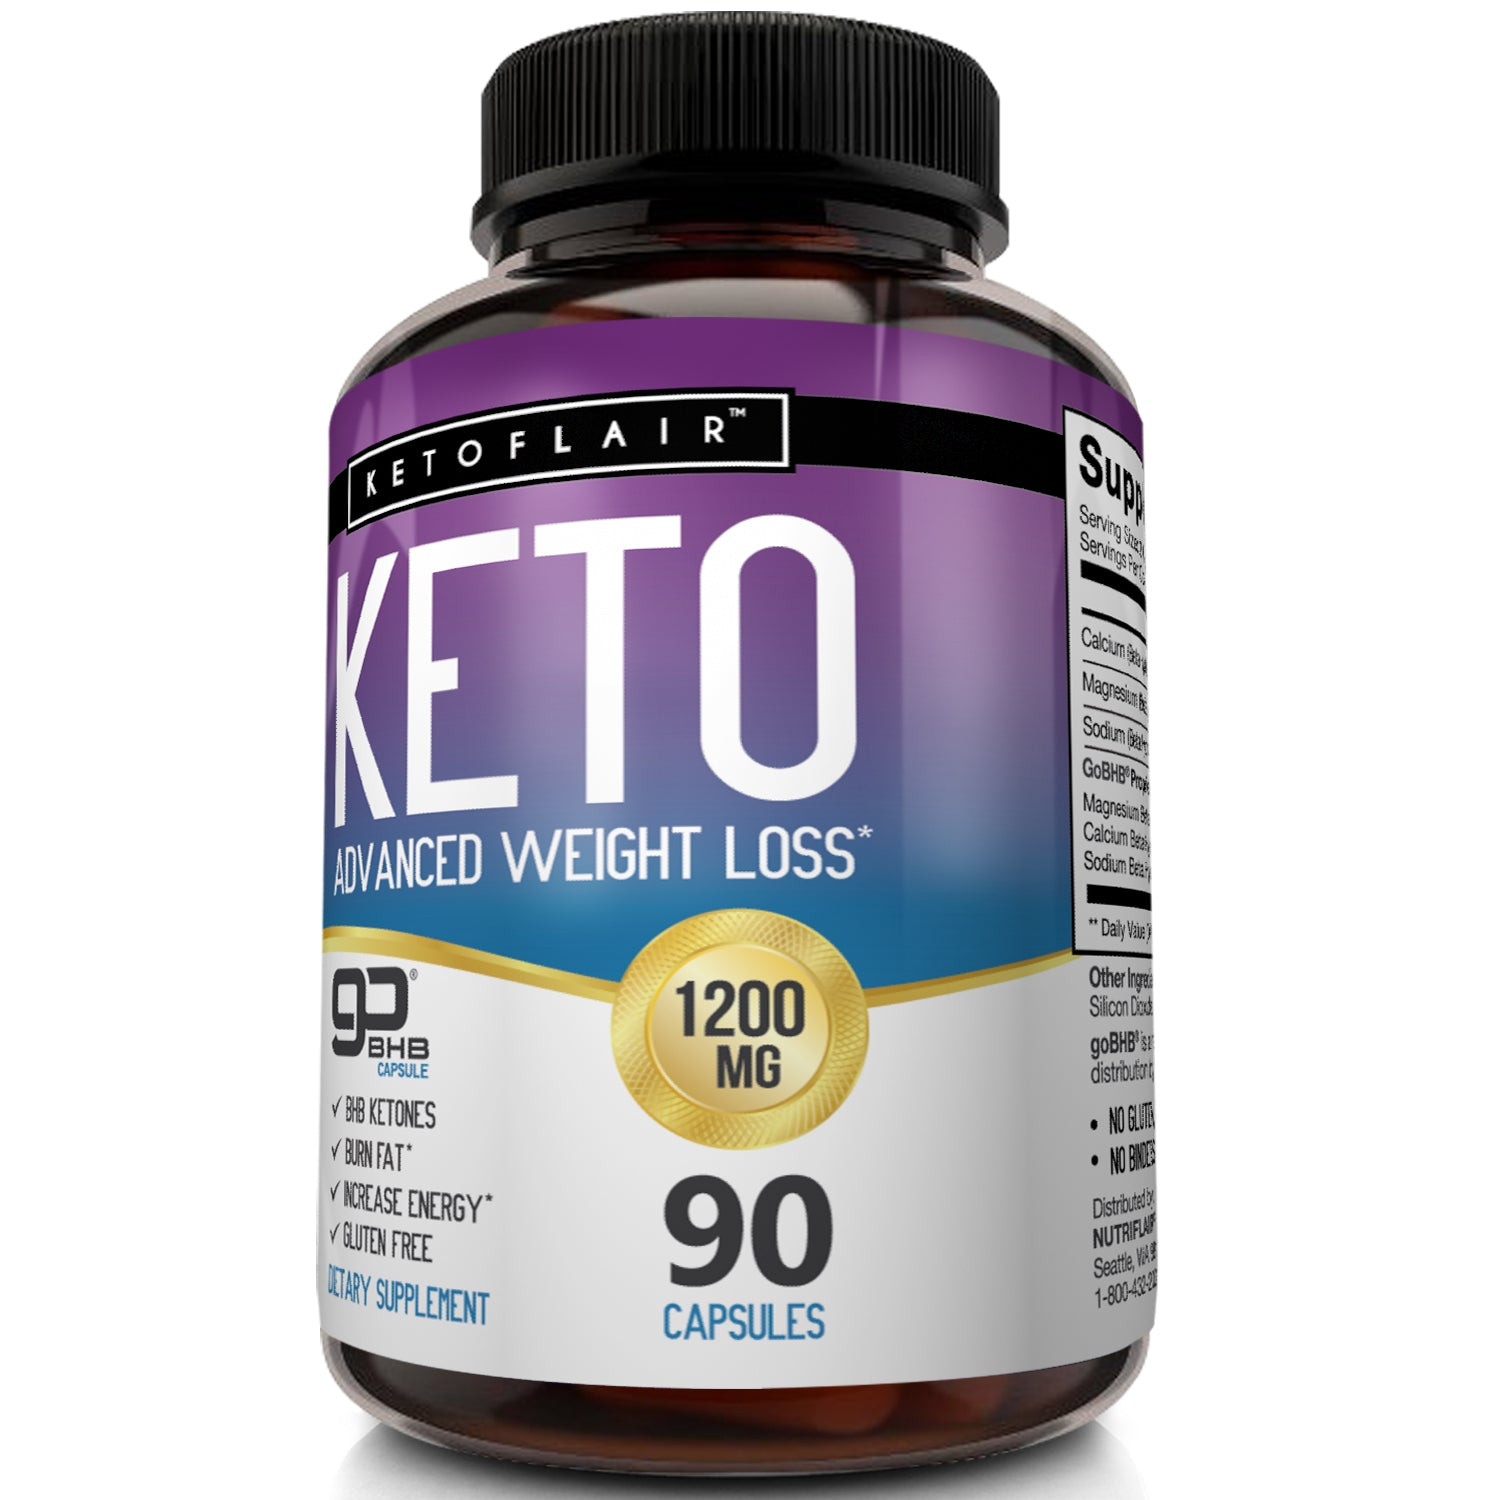 Keto Diet Products Beautiful Keto Diet Pills Gobhb 1200mg 90 Capsules – Nutriflair